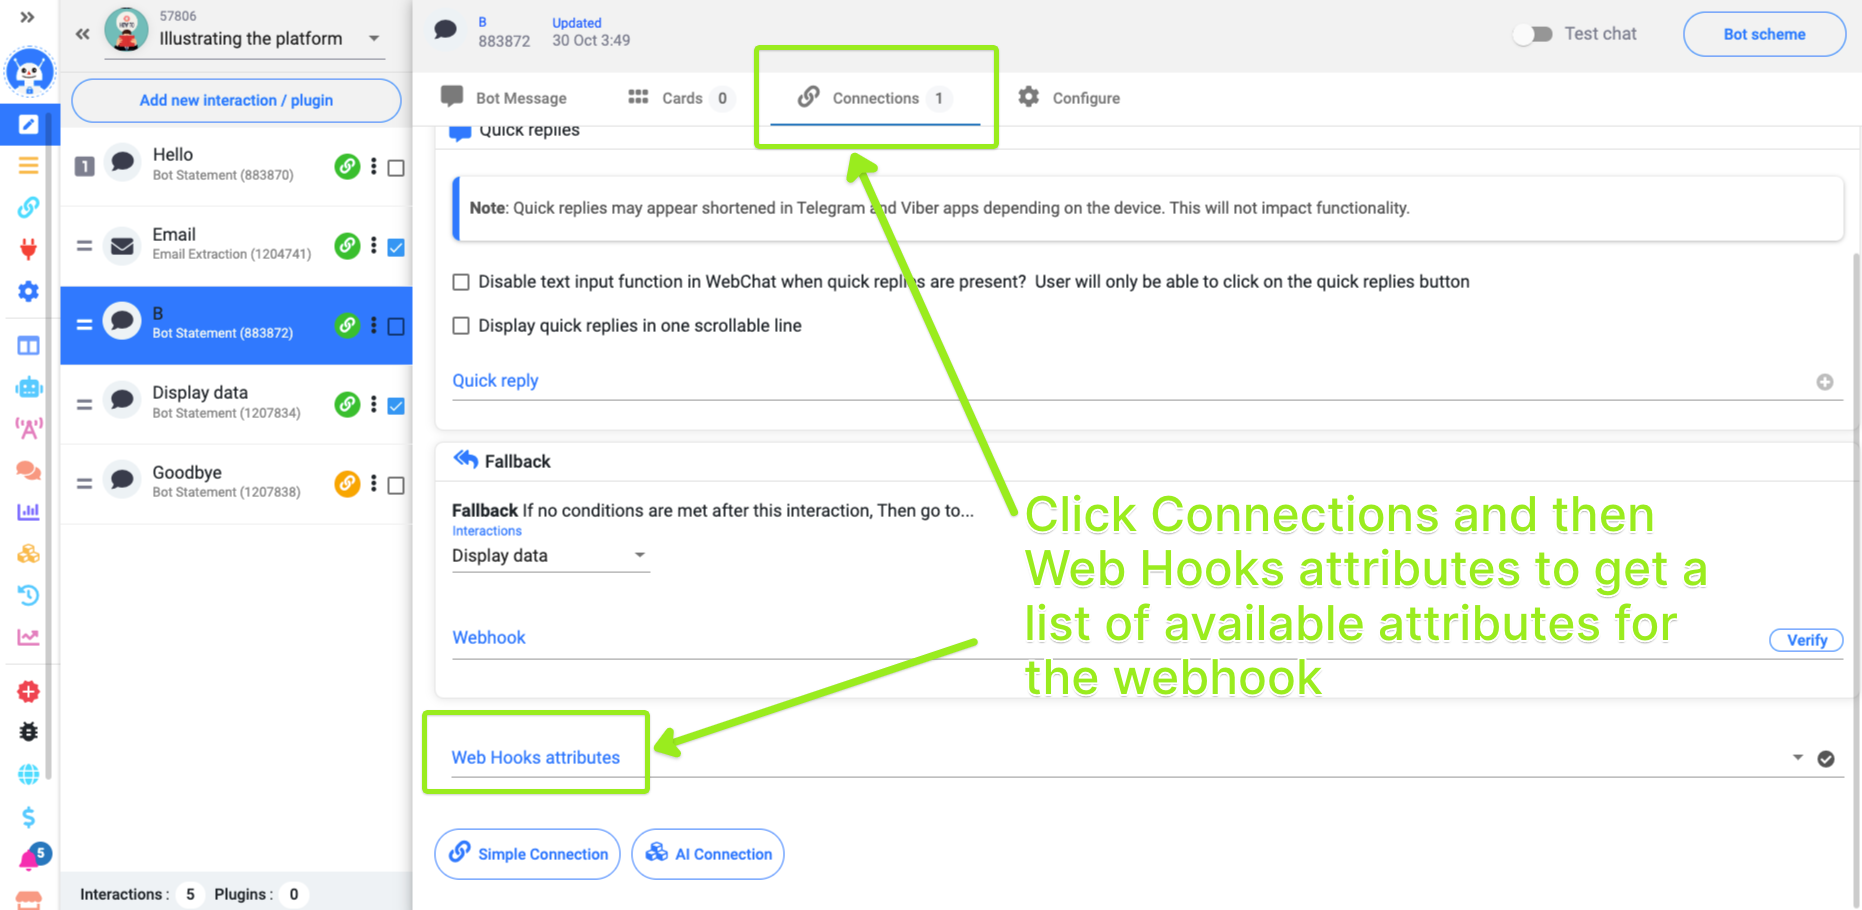 Webhooks can take the value of one interaction and export it to a URL